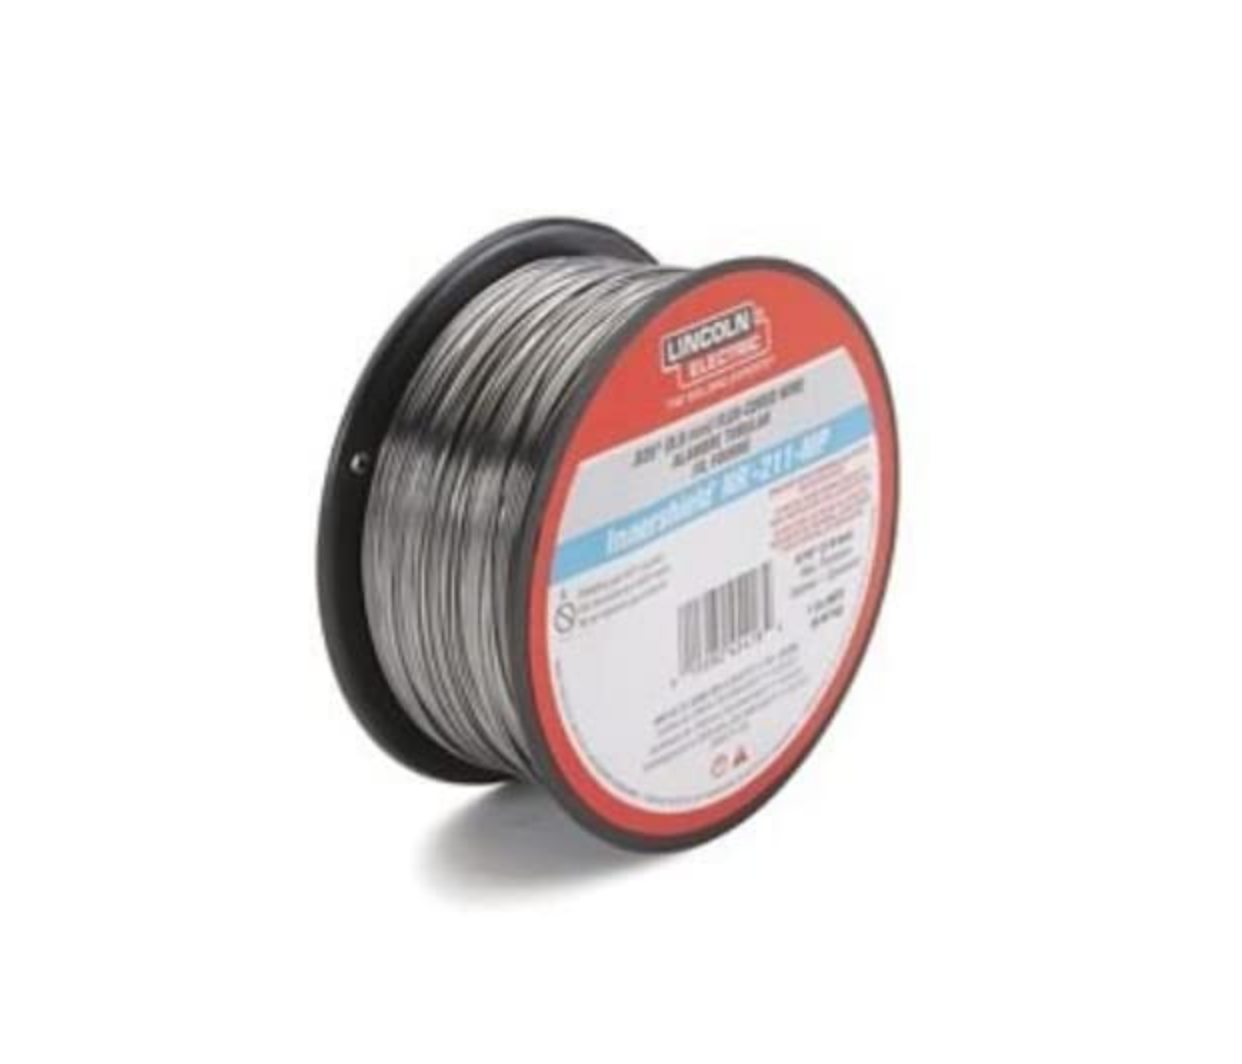 Lincoln Electric ED030584 MIG Welding Wire (An In-depth Review)